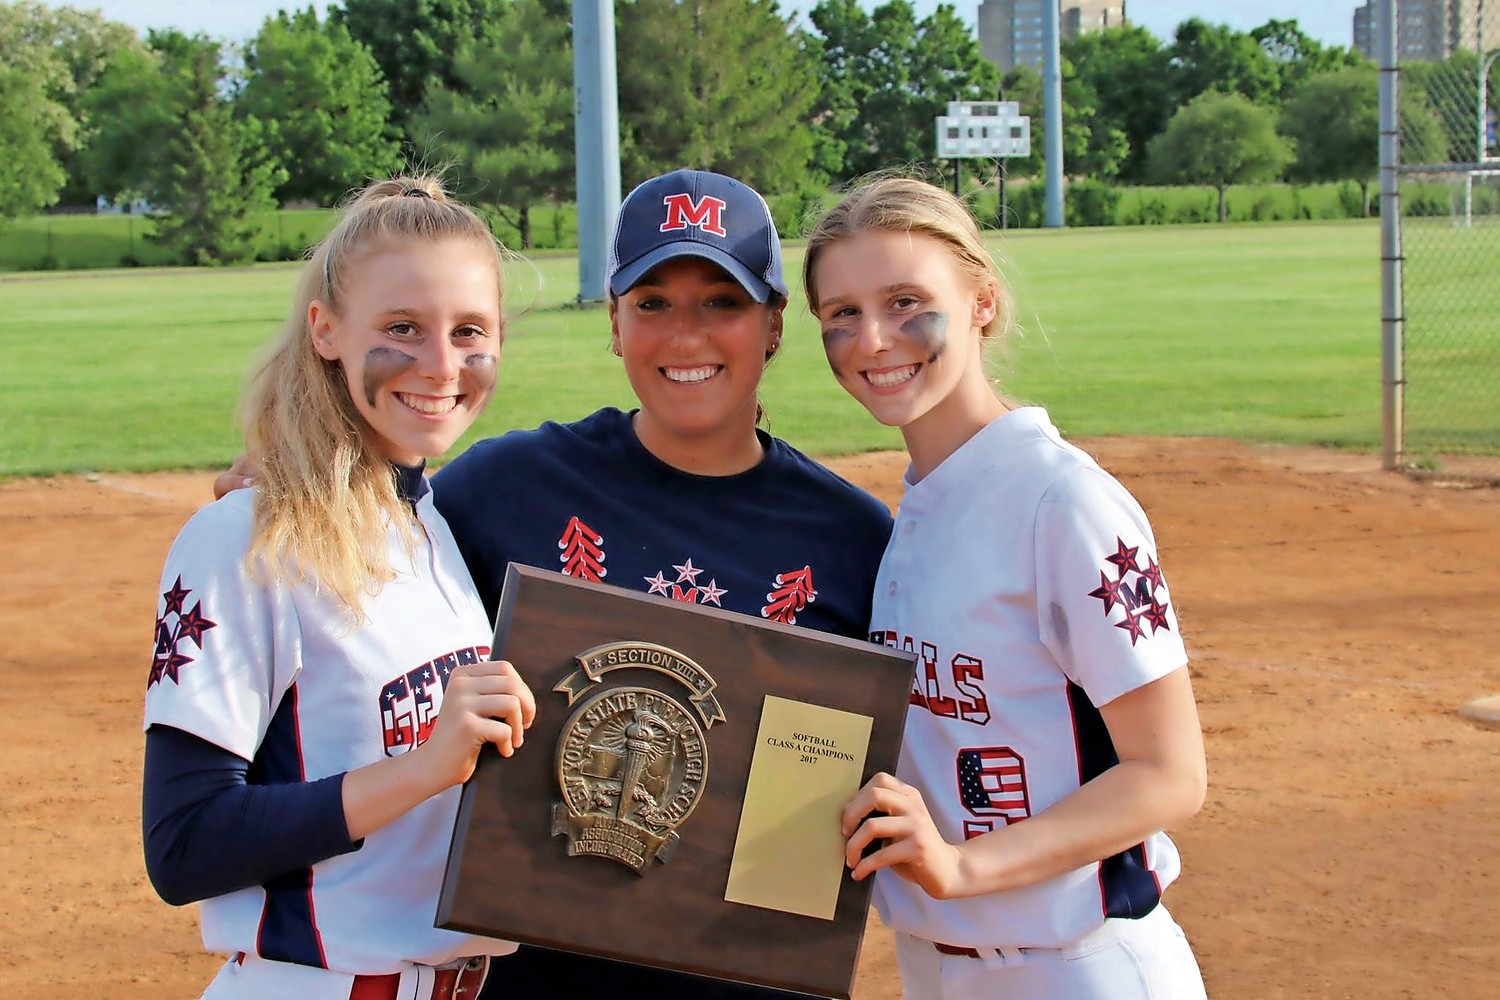 Ashley Budrewicz, left, her sister, Jessica, right, and MacArthur High School assistant softball coach Deana Tororici, center, celebrated their win in the Nassau County Softball Division A Championship series last May.